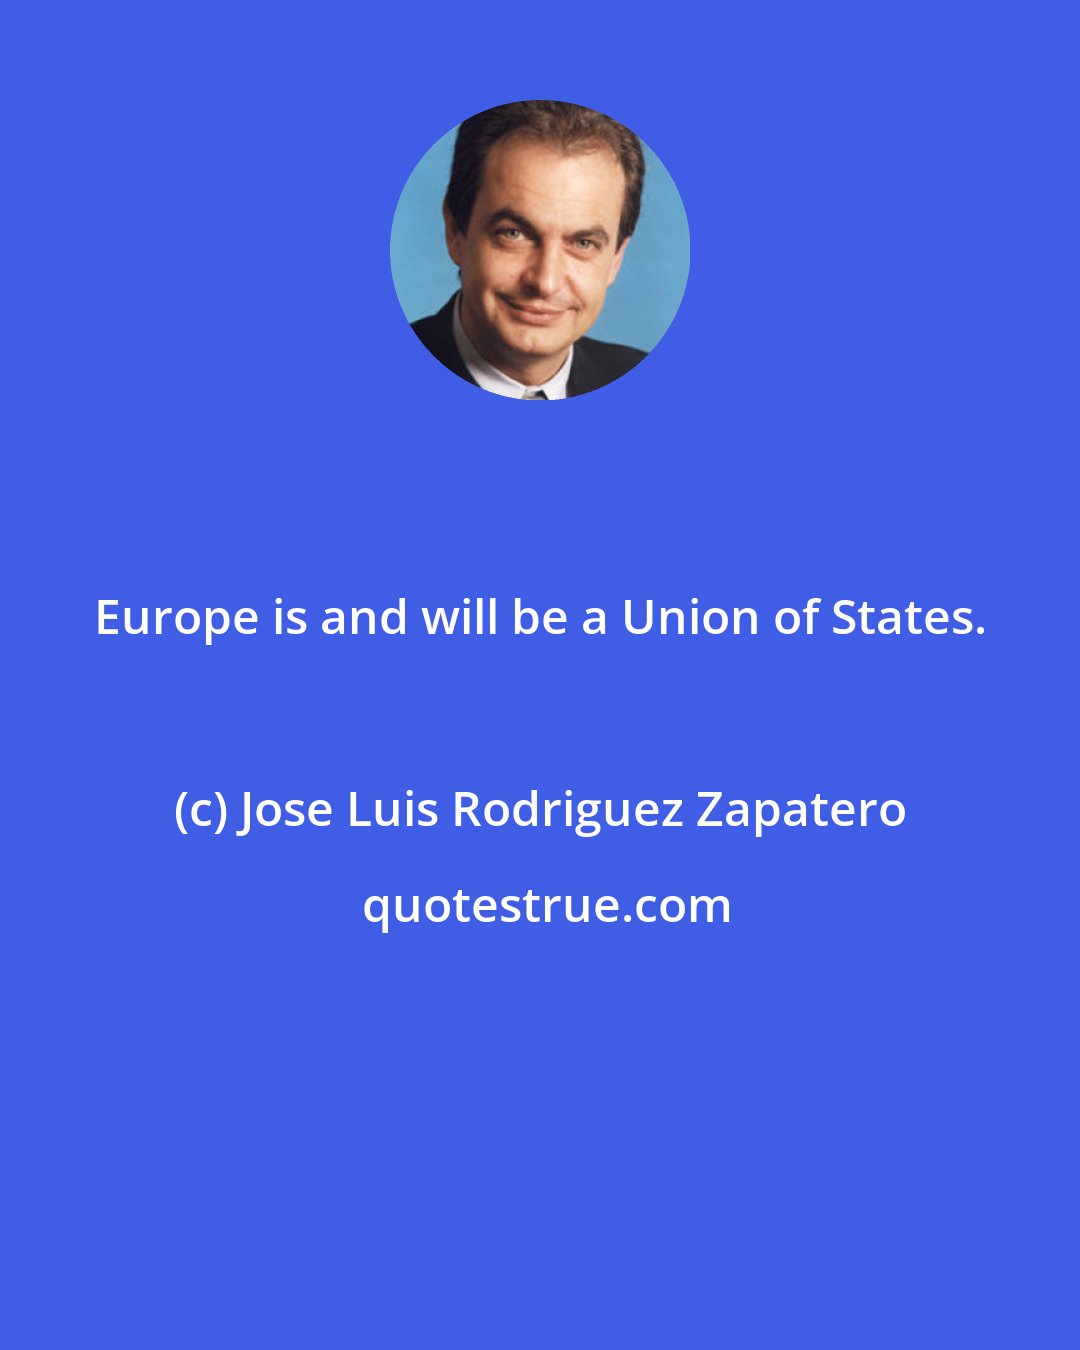 Jose Luis Rodriguez Zapatero: Europe is and will be a Union of States.